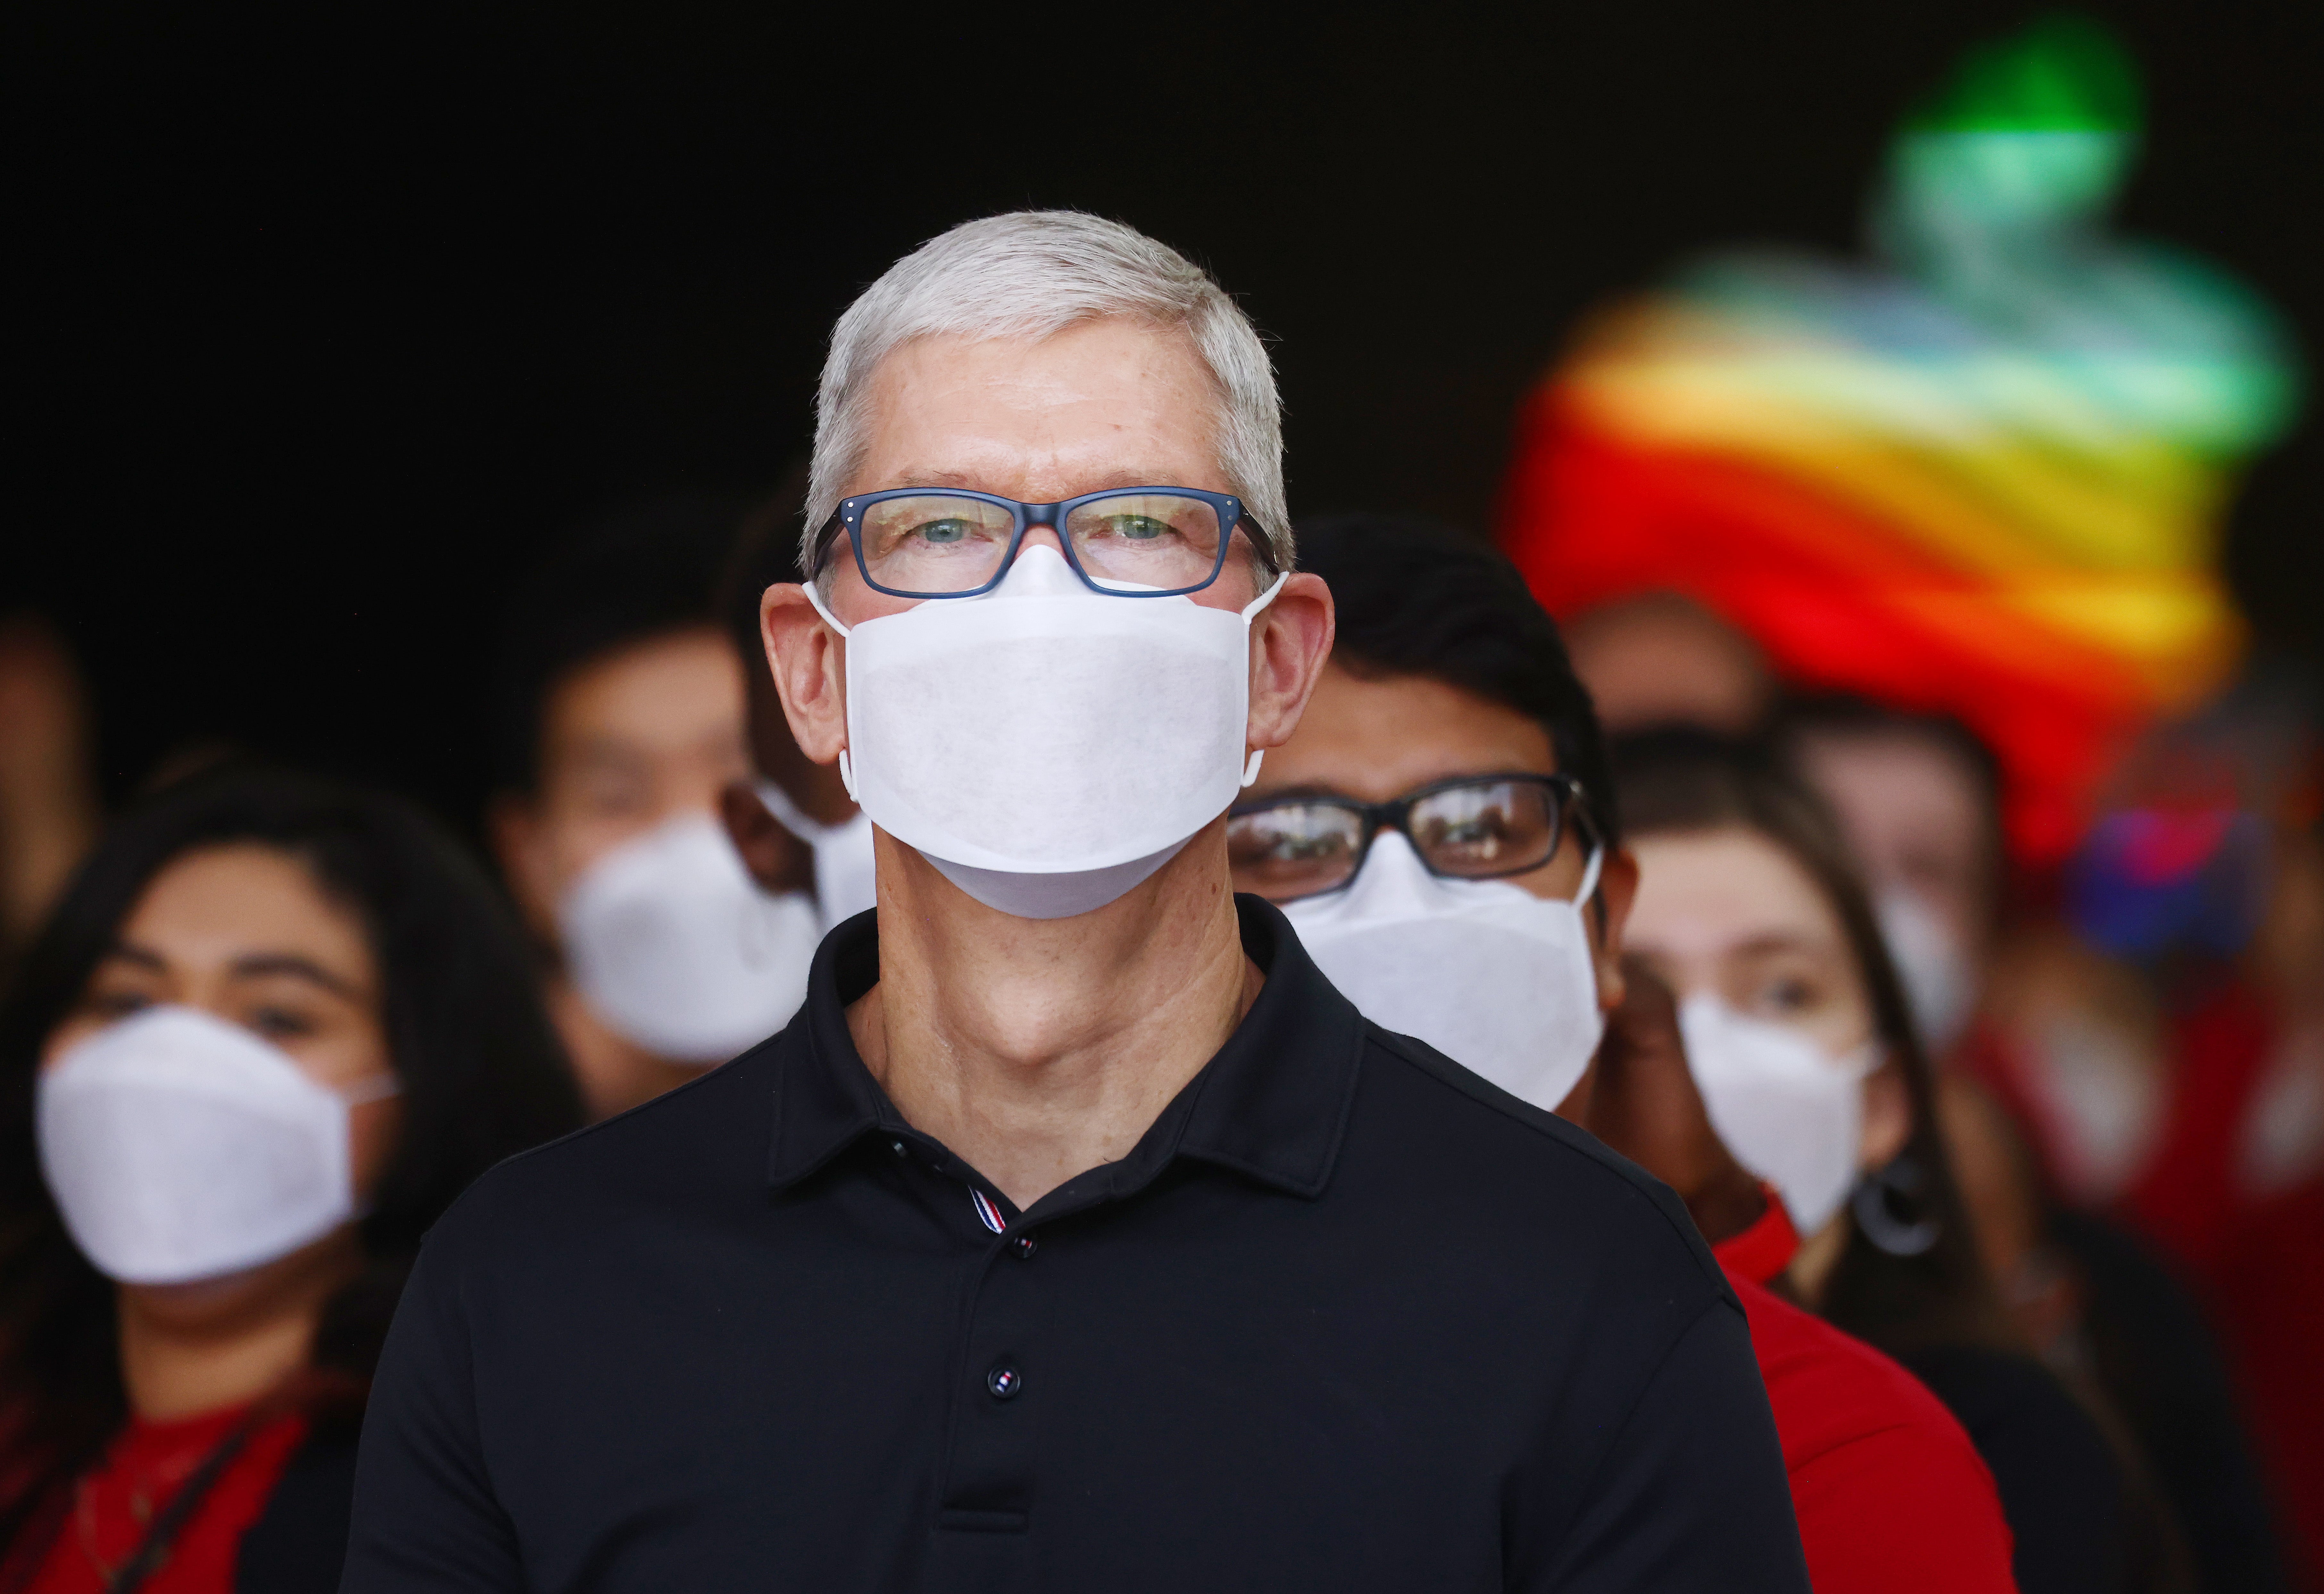 File: Apple CEO Tim Cook attends the grand opening of the new Apple store at The Grove on 19 November 2021 in Los Angeles, California